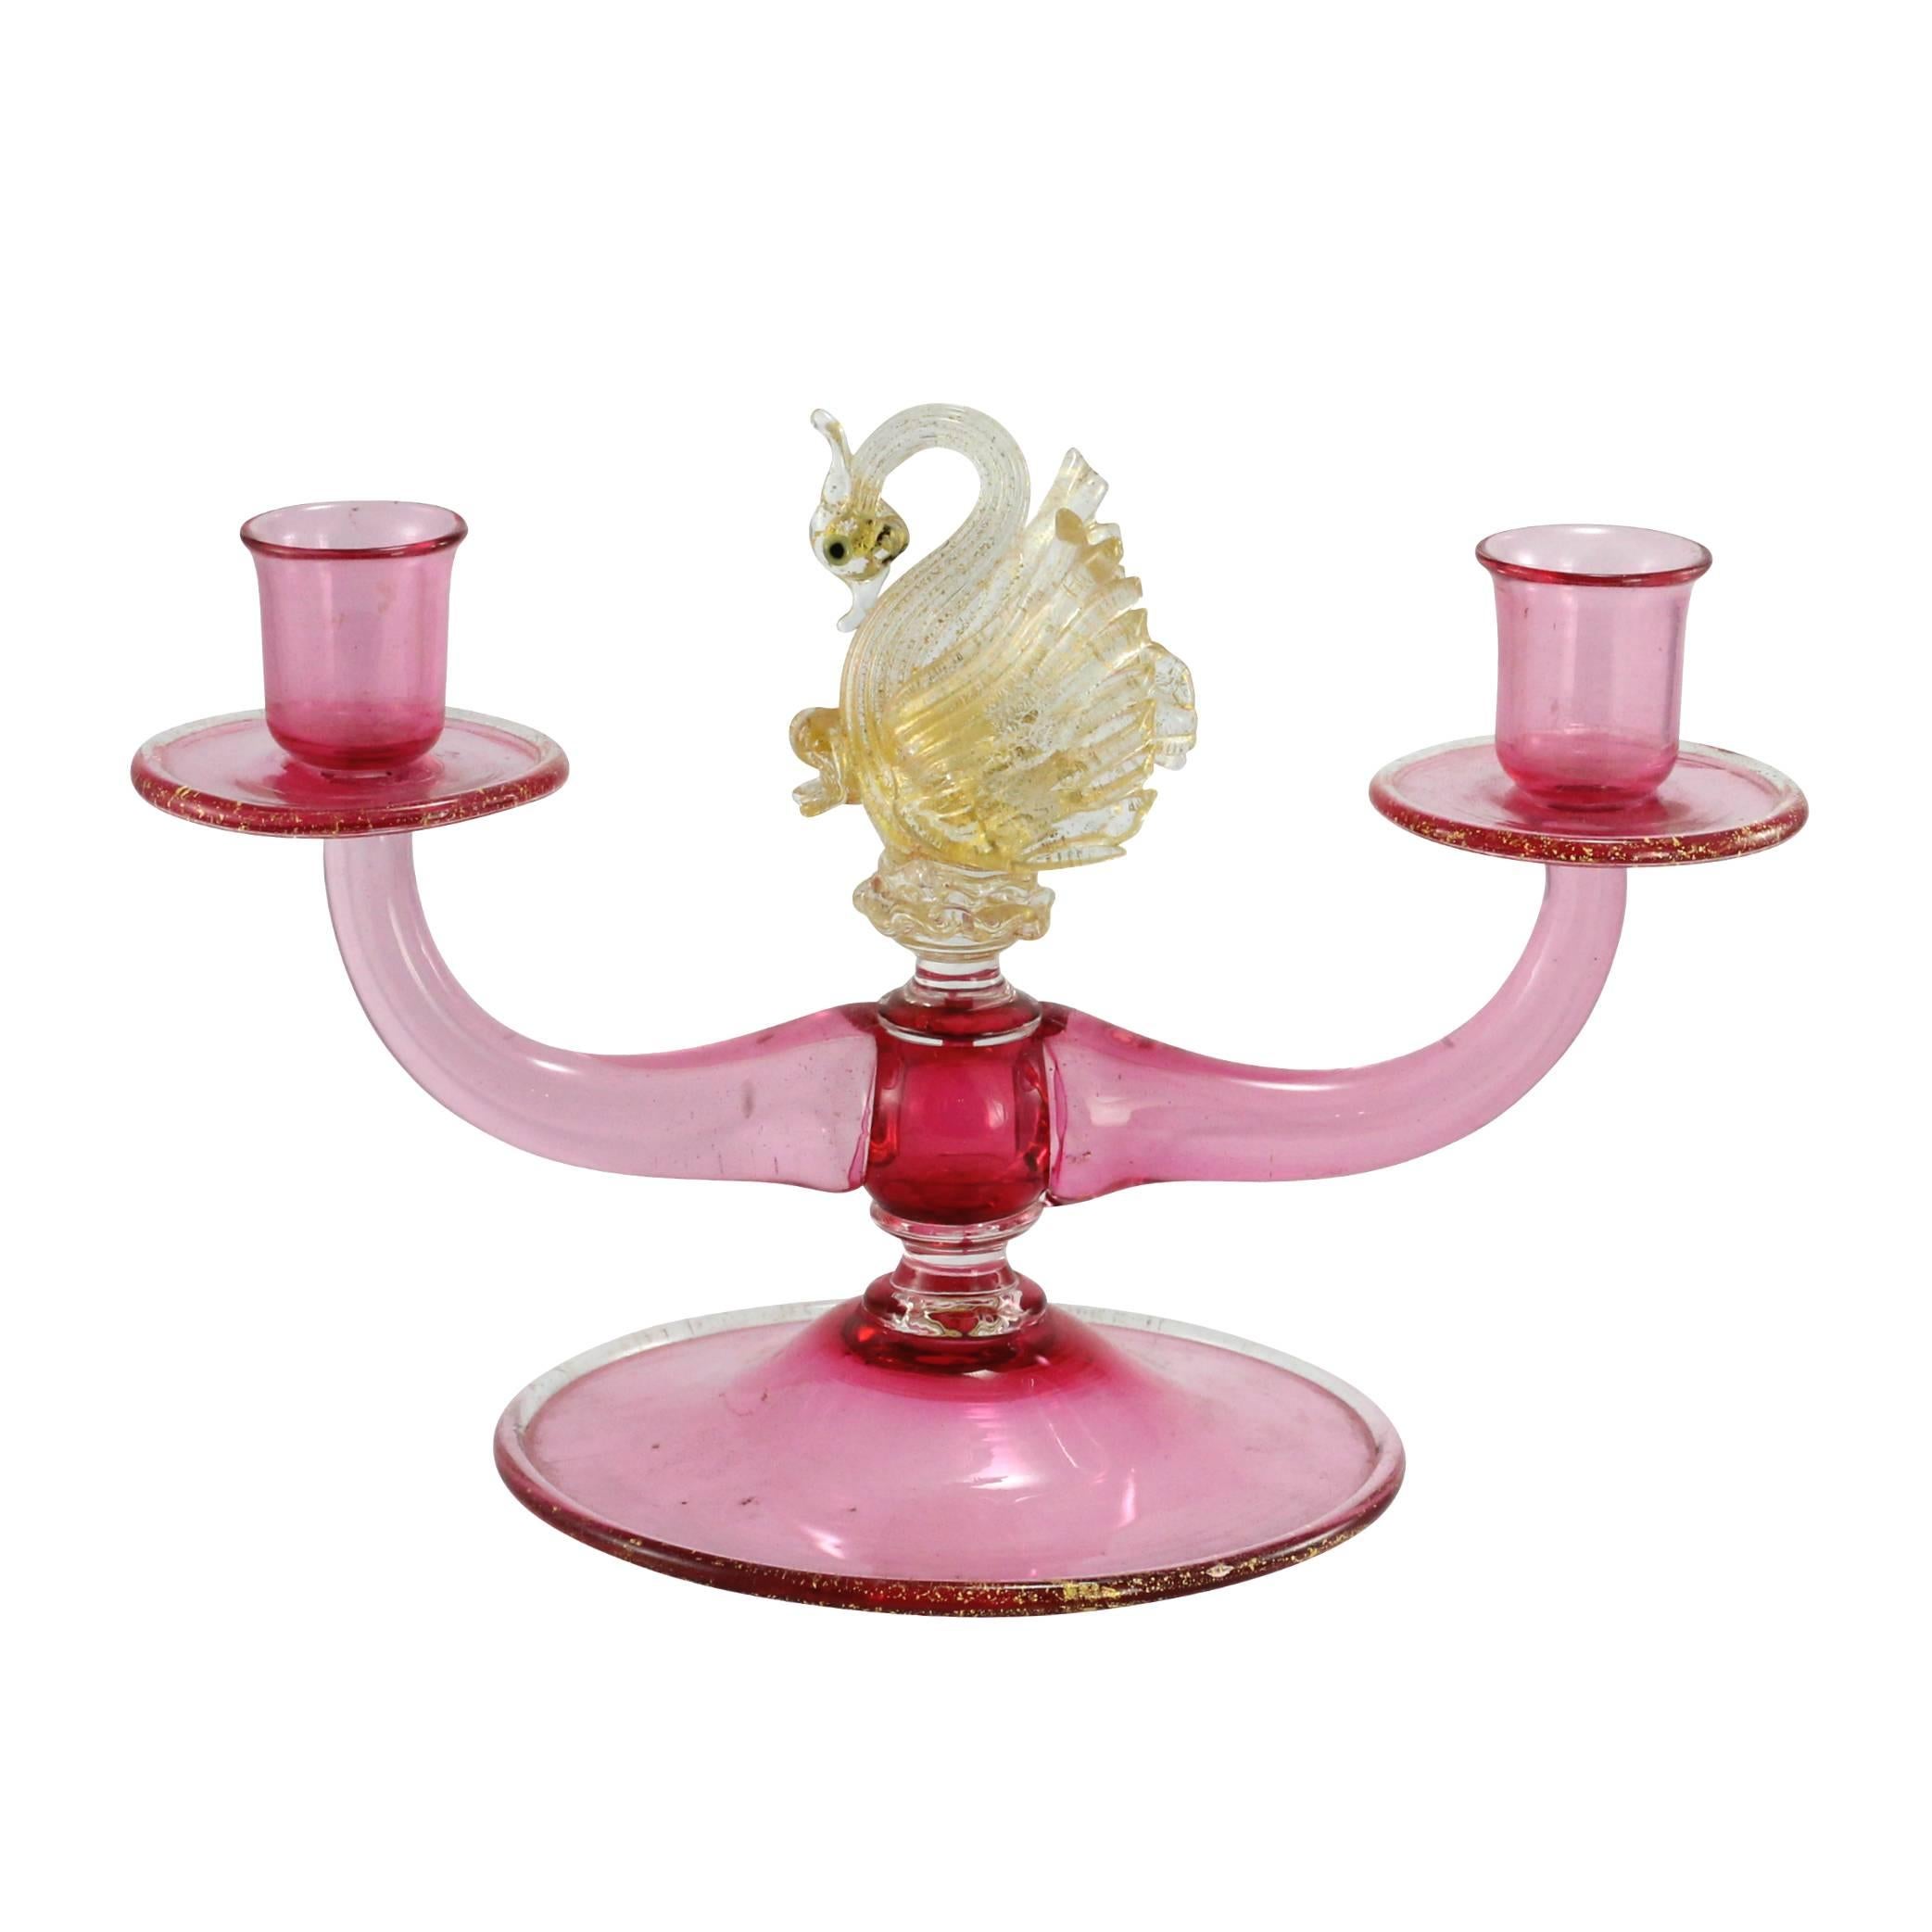 A midcentury, Venetian Murano glass candelabra and swan in gold on a pink base.

Murano, a small Venetian island has been known for its world leading glassworks for centuries. Today, Murano is home to a vast number of factories and a few